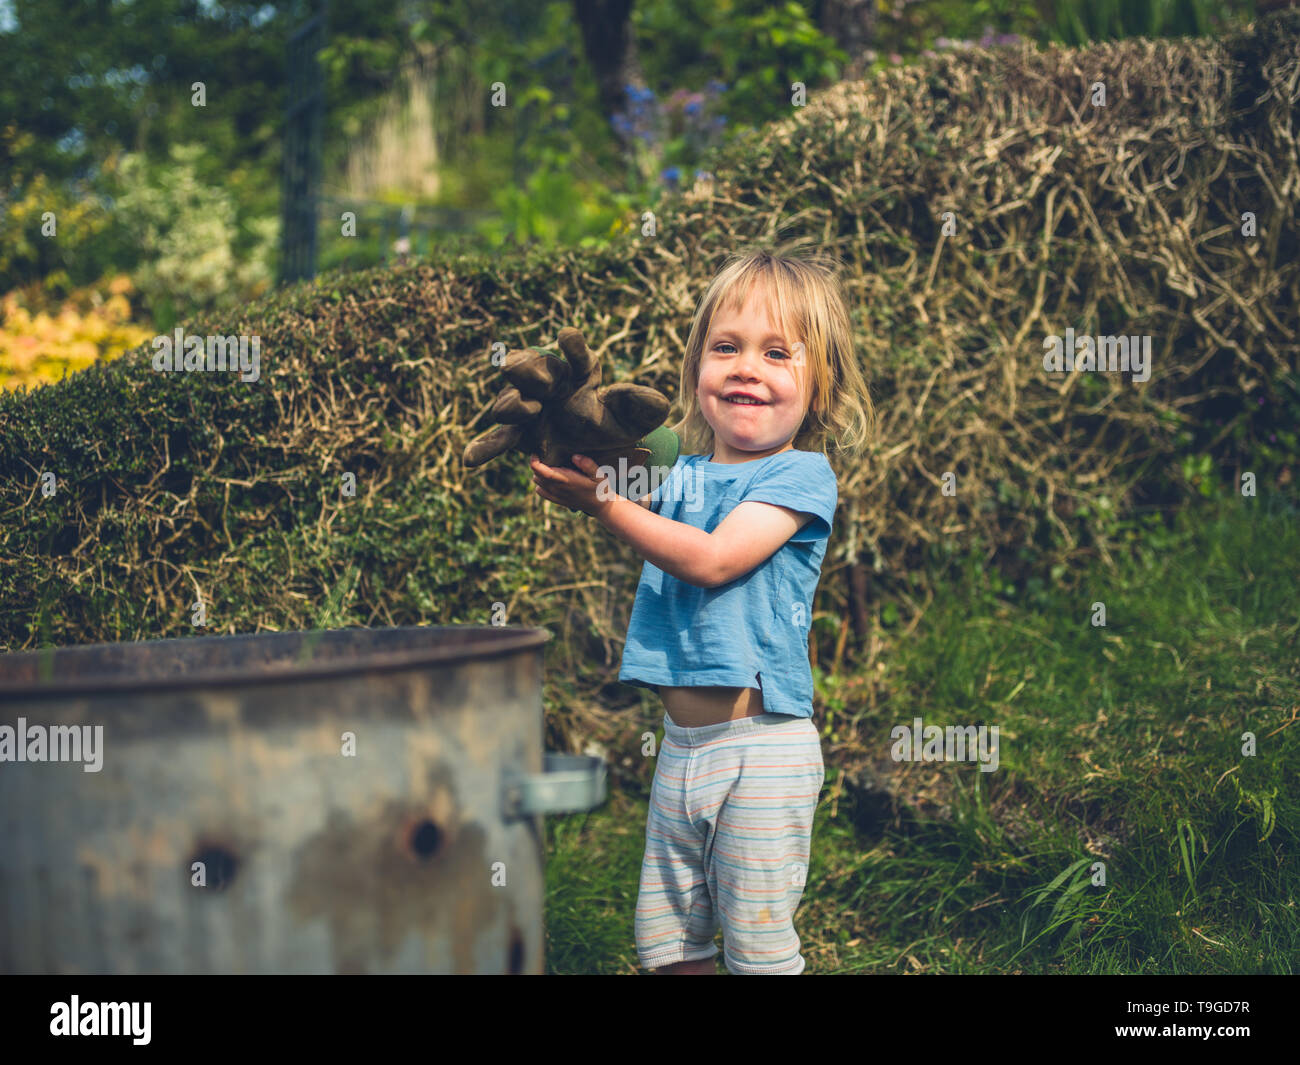 A little toddler is gardening and putting weeds in an incinerator Stock Photo